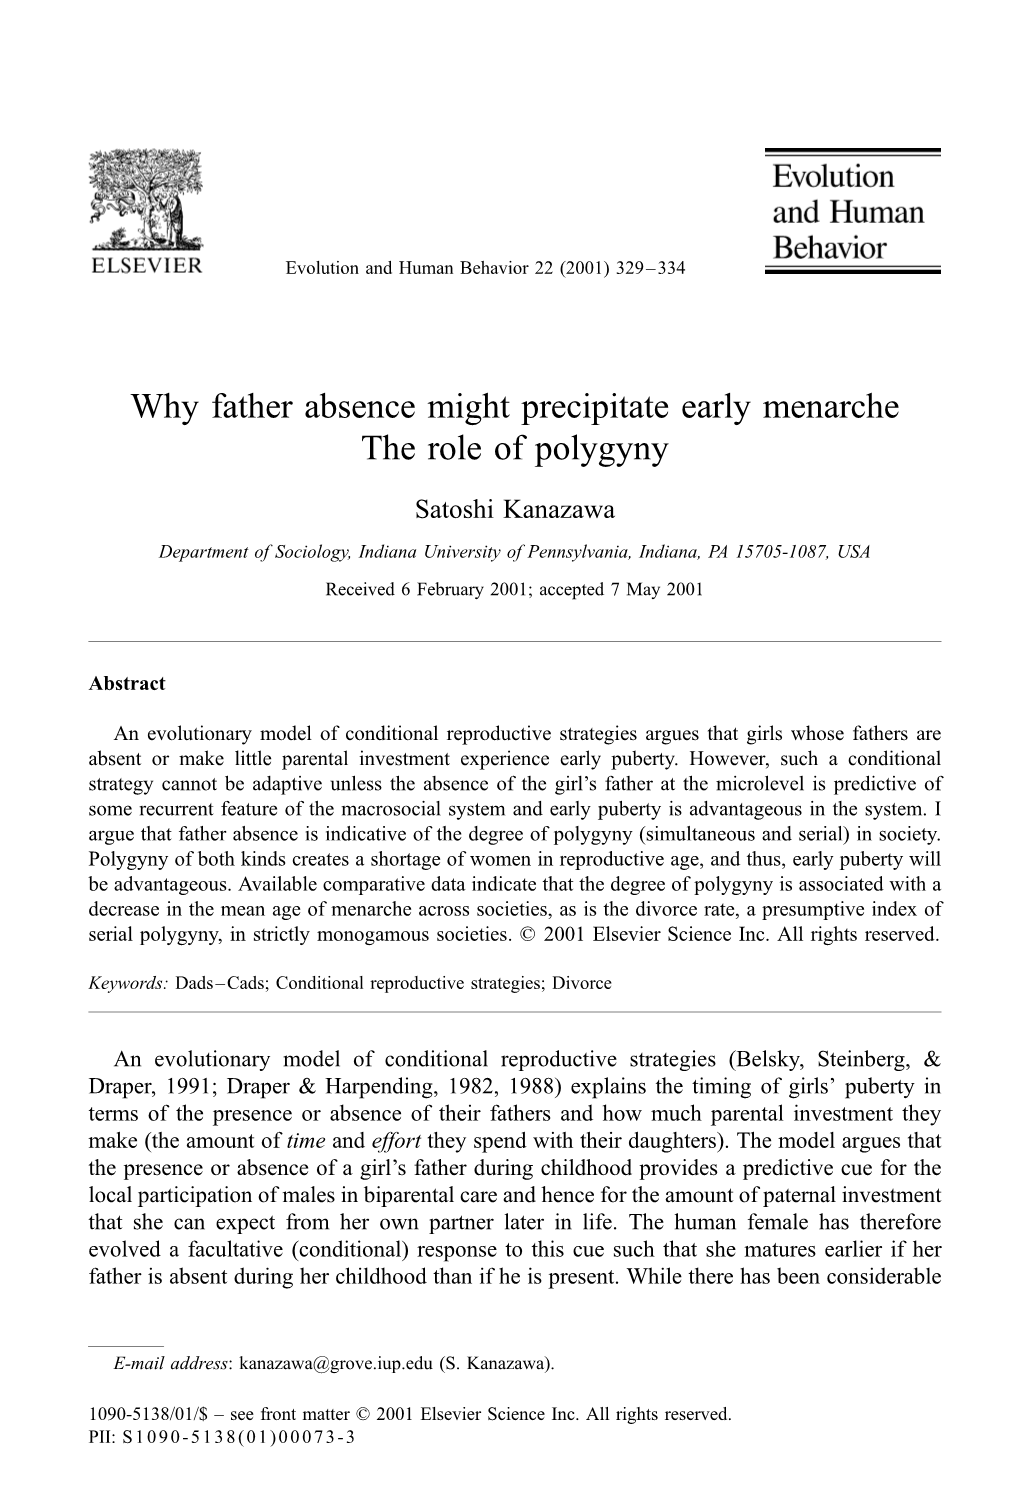 Why Father Absence Might Precipitate Early Menarche the Role of Polygyny